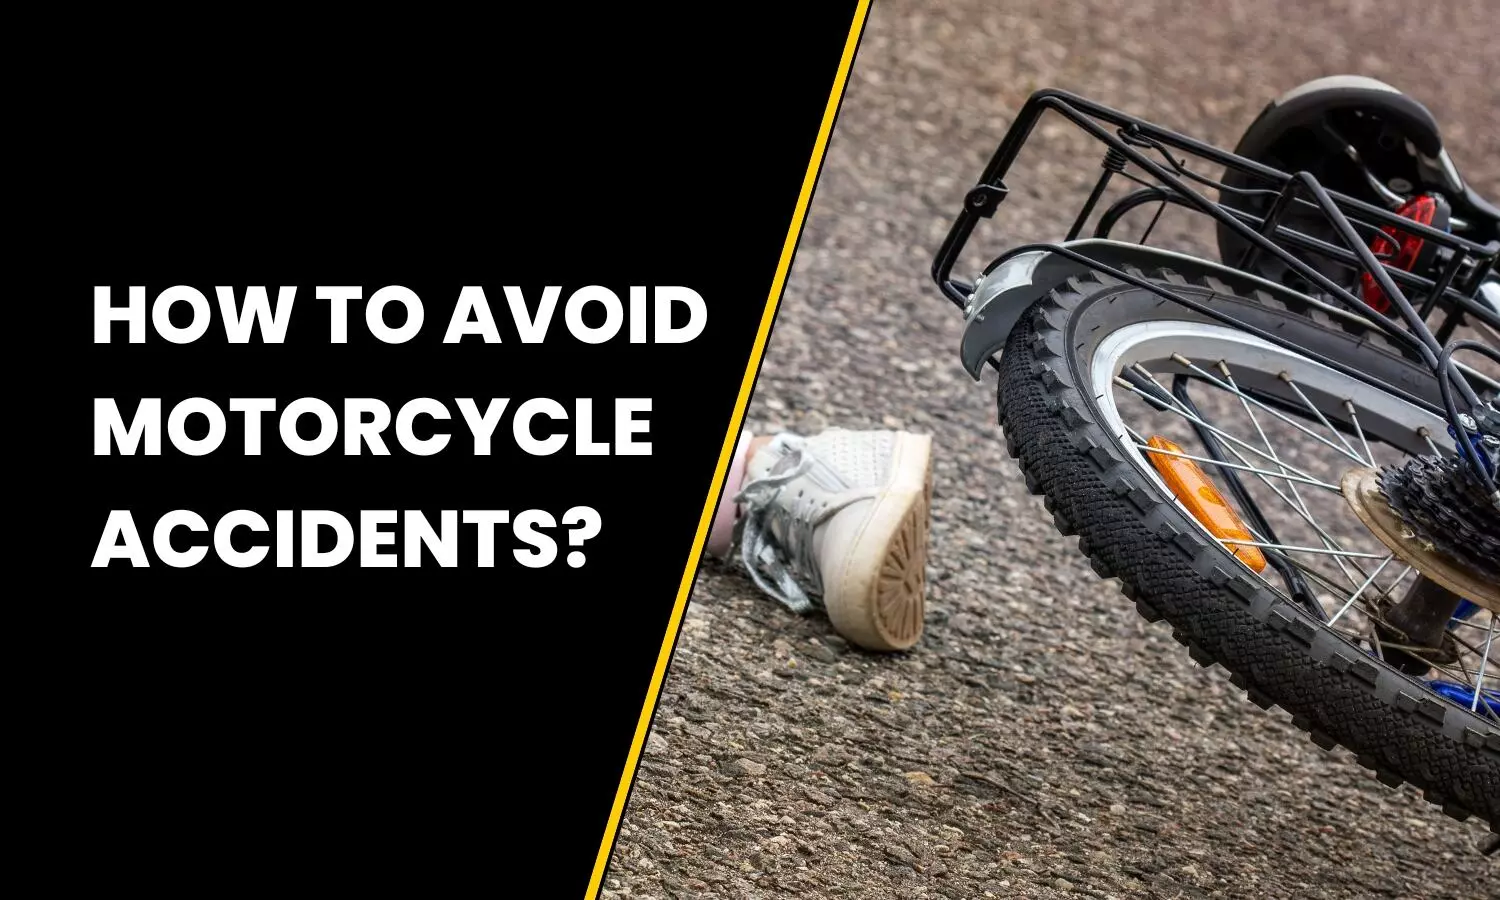 How to Avoid Motorcycle Accidents?